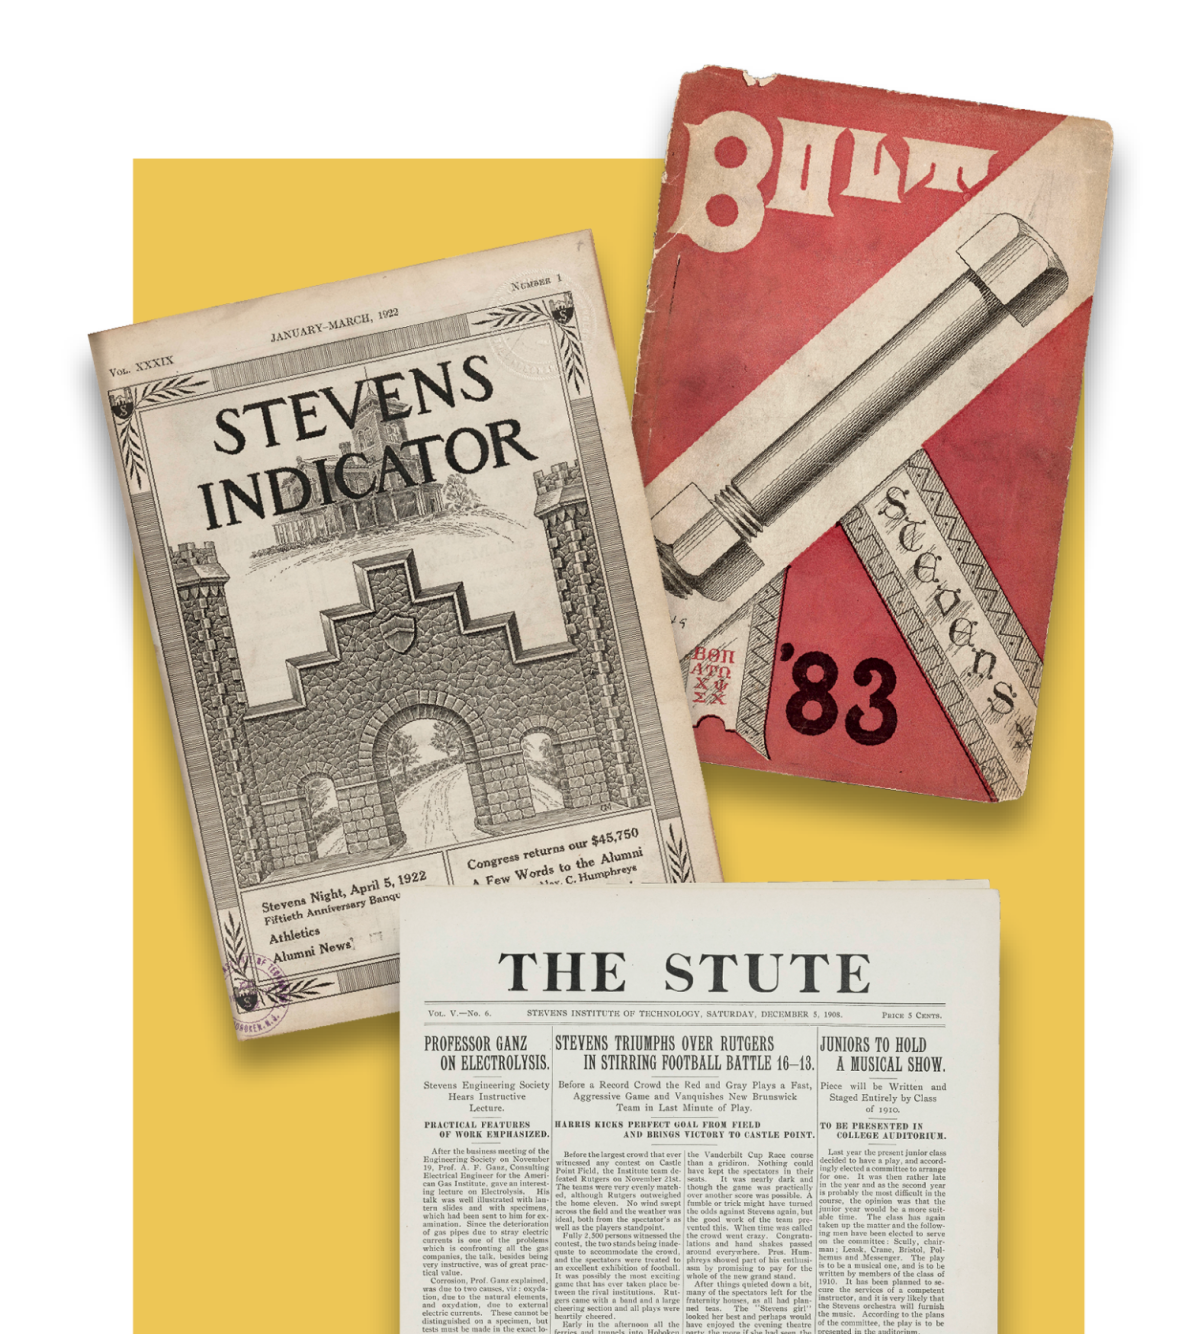 Covers from three historical Stevens publications. Clockwise from left: the Stevens Indicator, Bolt, and The Stute. 